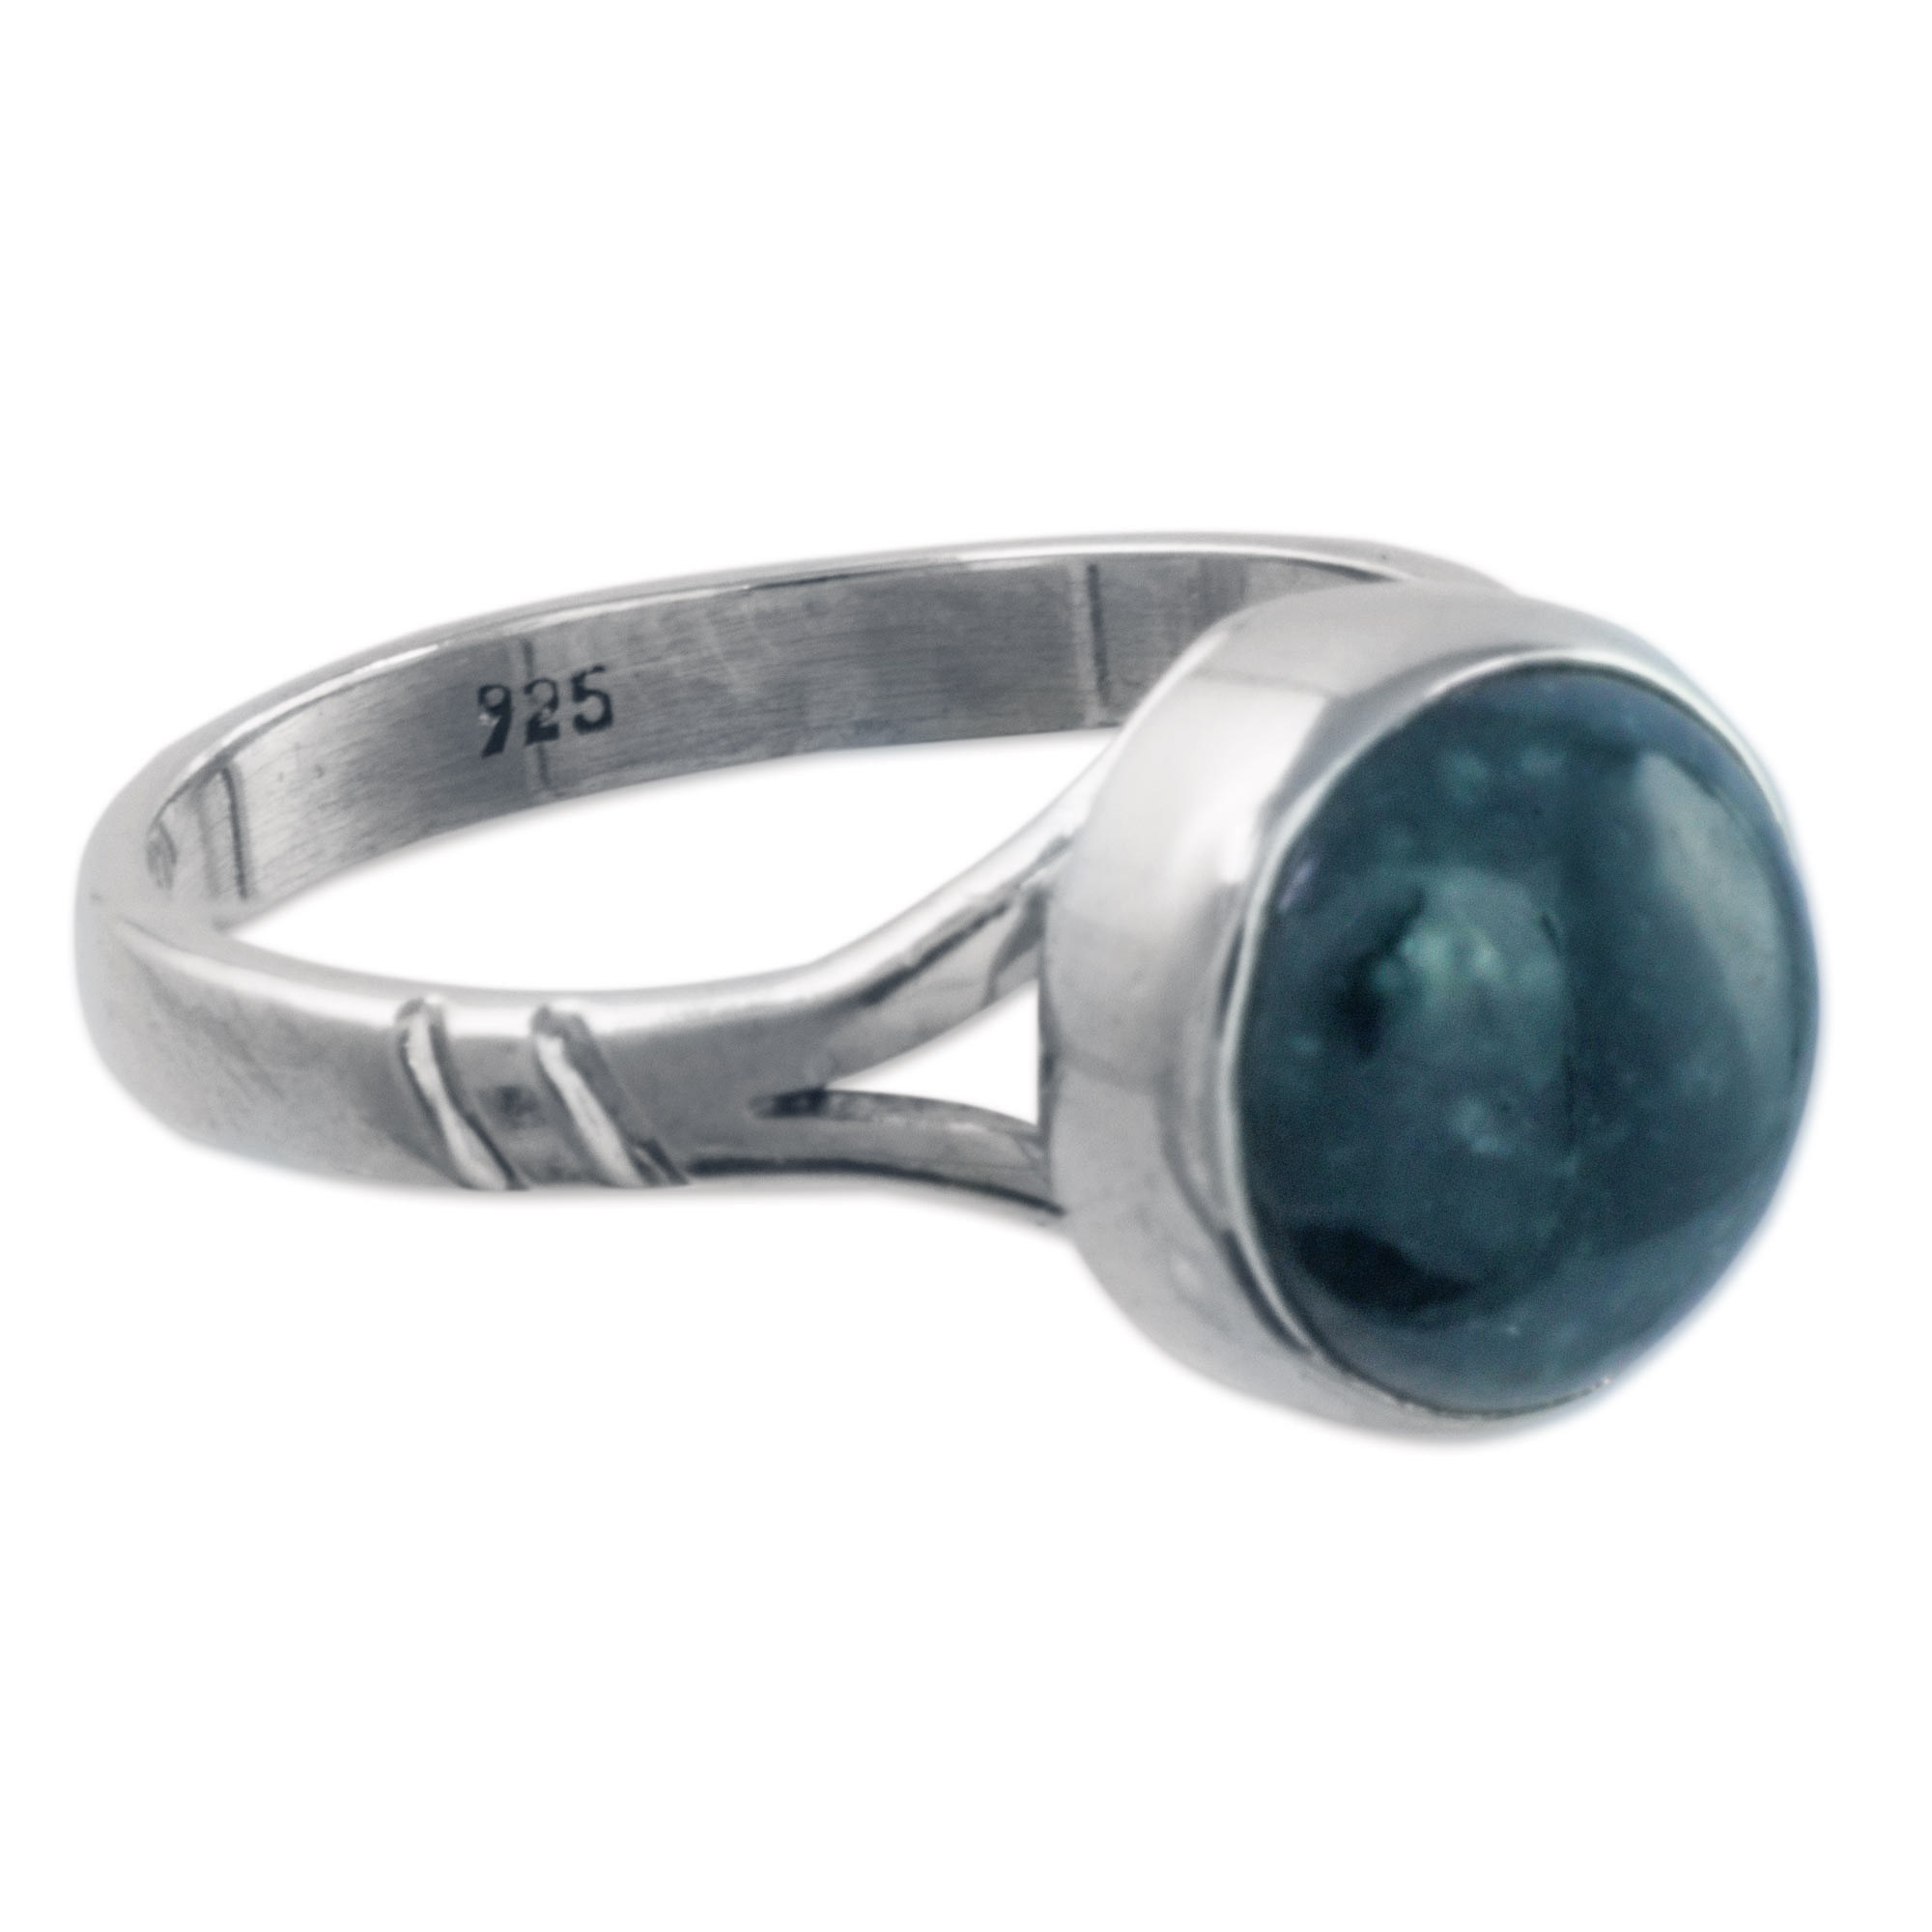 Handcrafted Silver Single Stone Ring with Green Jade - Verdant Venus ...